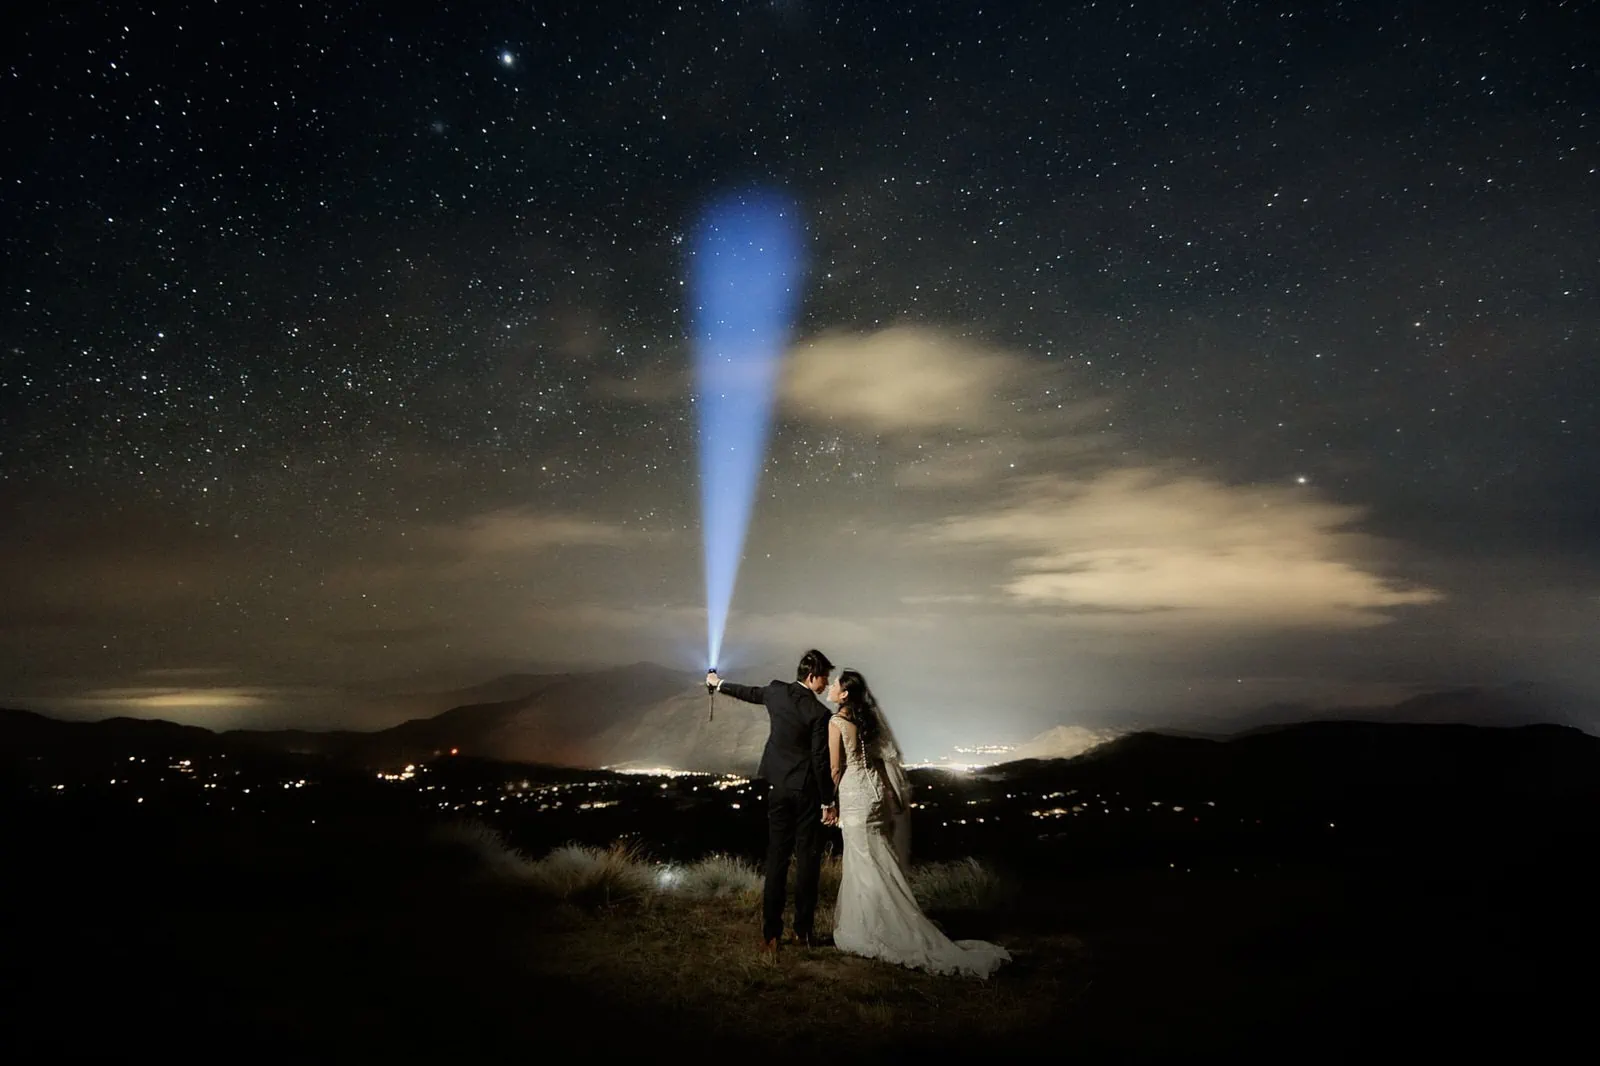 Queenstown New Zealand Elopement Wedding Photographer - A bride and groom standing on top of a hill under a starry sky, captured beautifully for our portfolio.